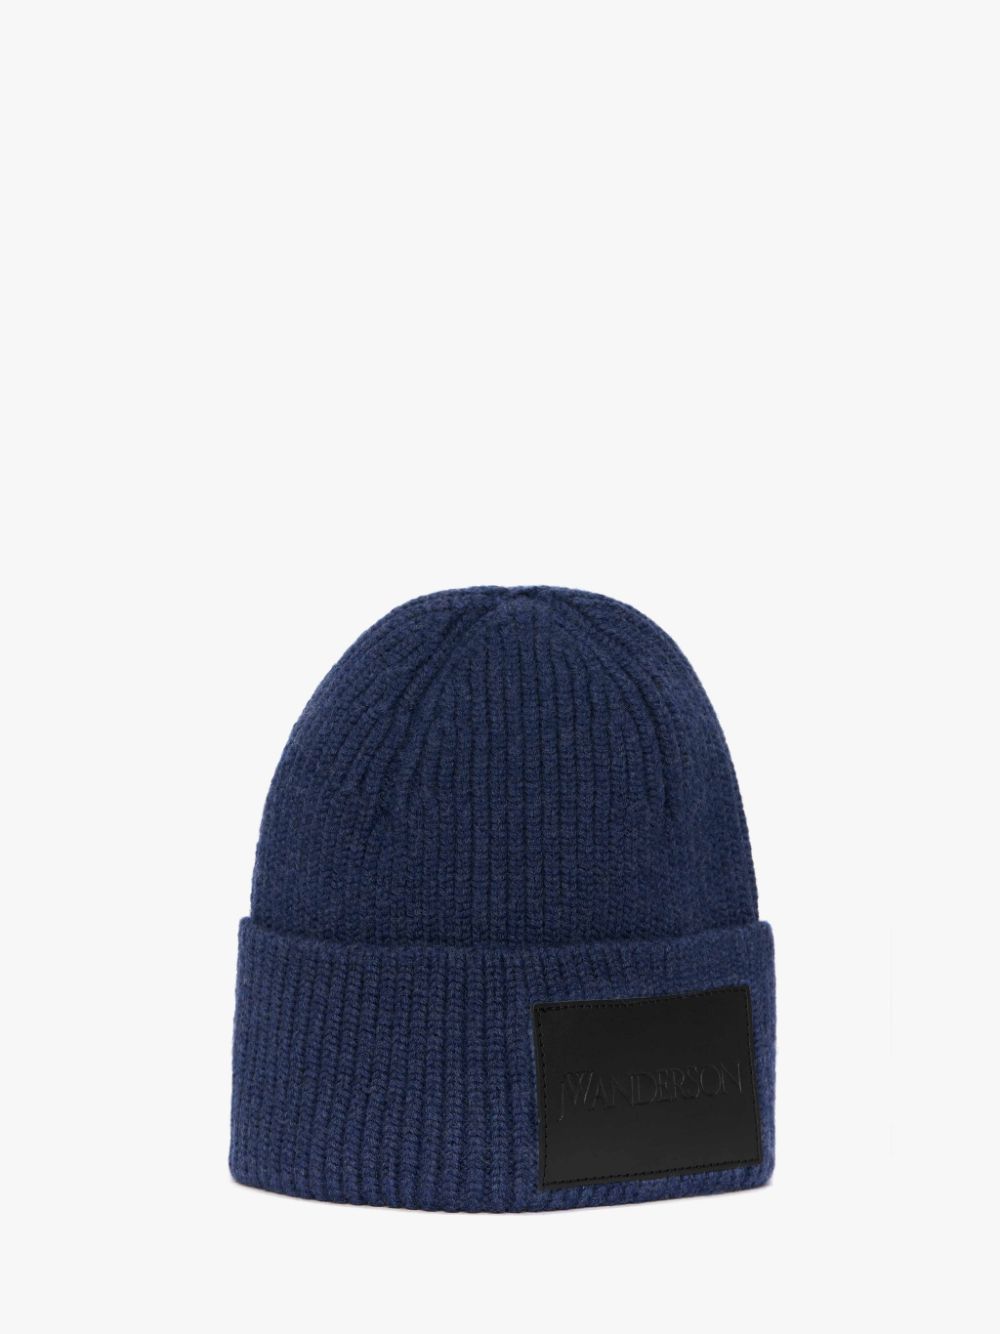 JW ANDERSON BEANIE WITH LOGO PATCH